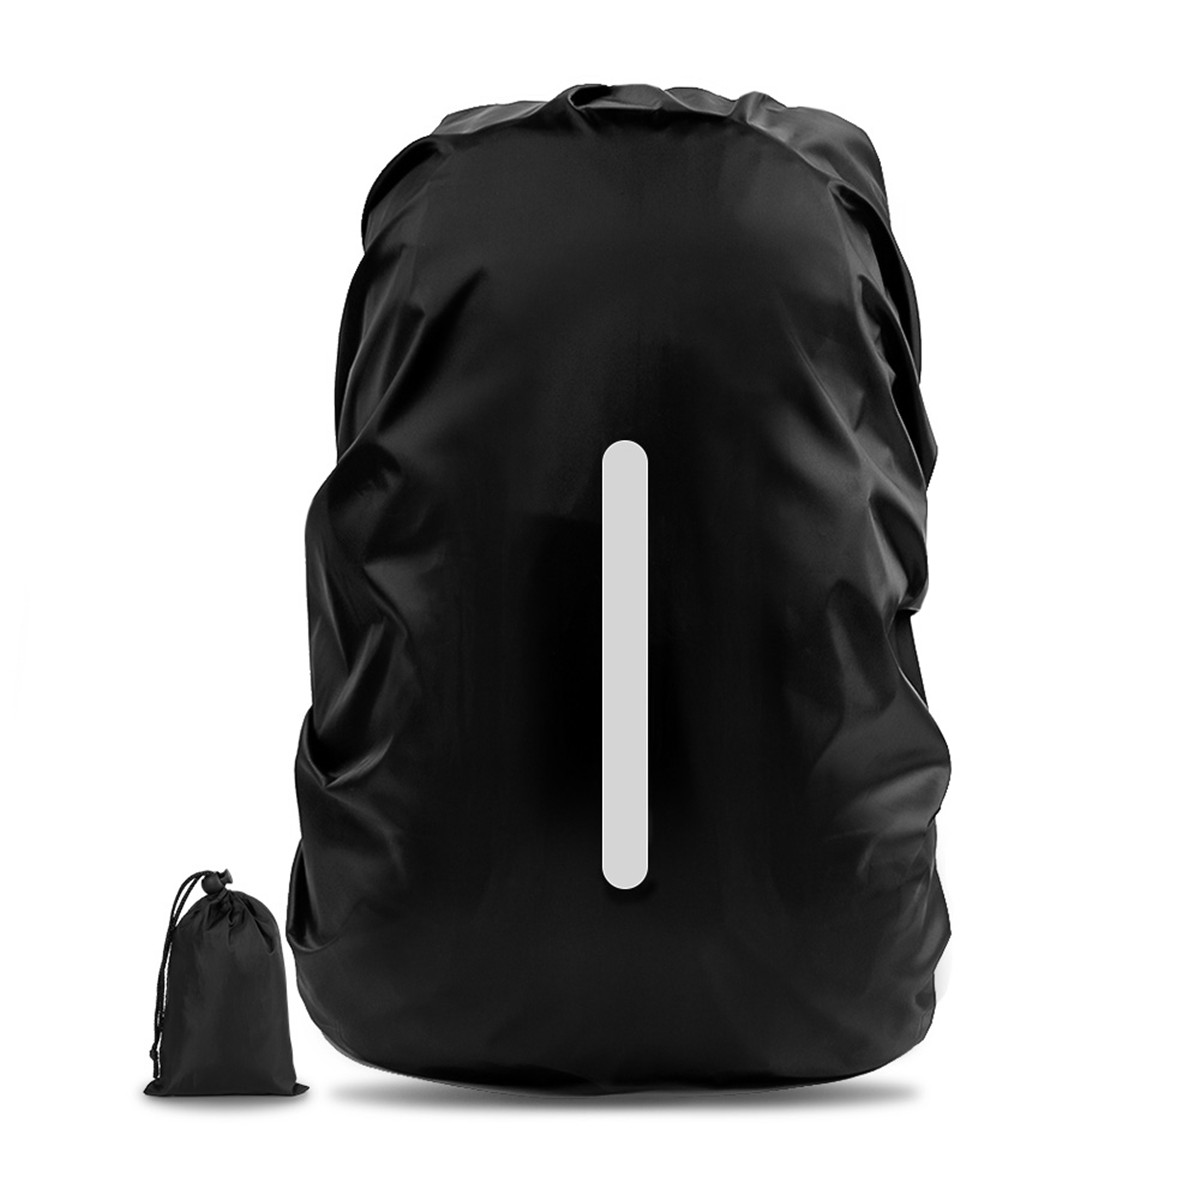 Portable-Outdoor-Backpack-Waterproof-Dust-Cover-Travel-Backpack-Rain-Cover-Hiking-Camping-Sports-Acc-1790124-7